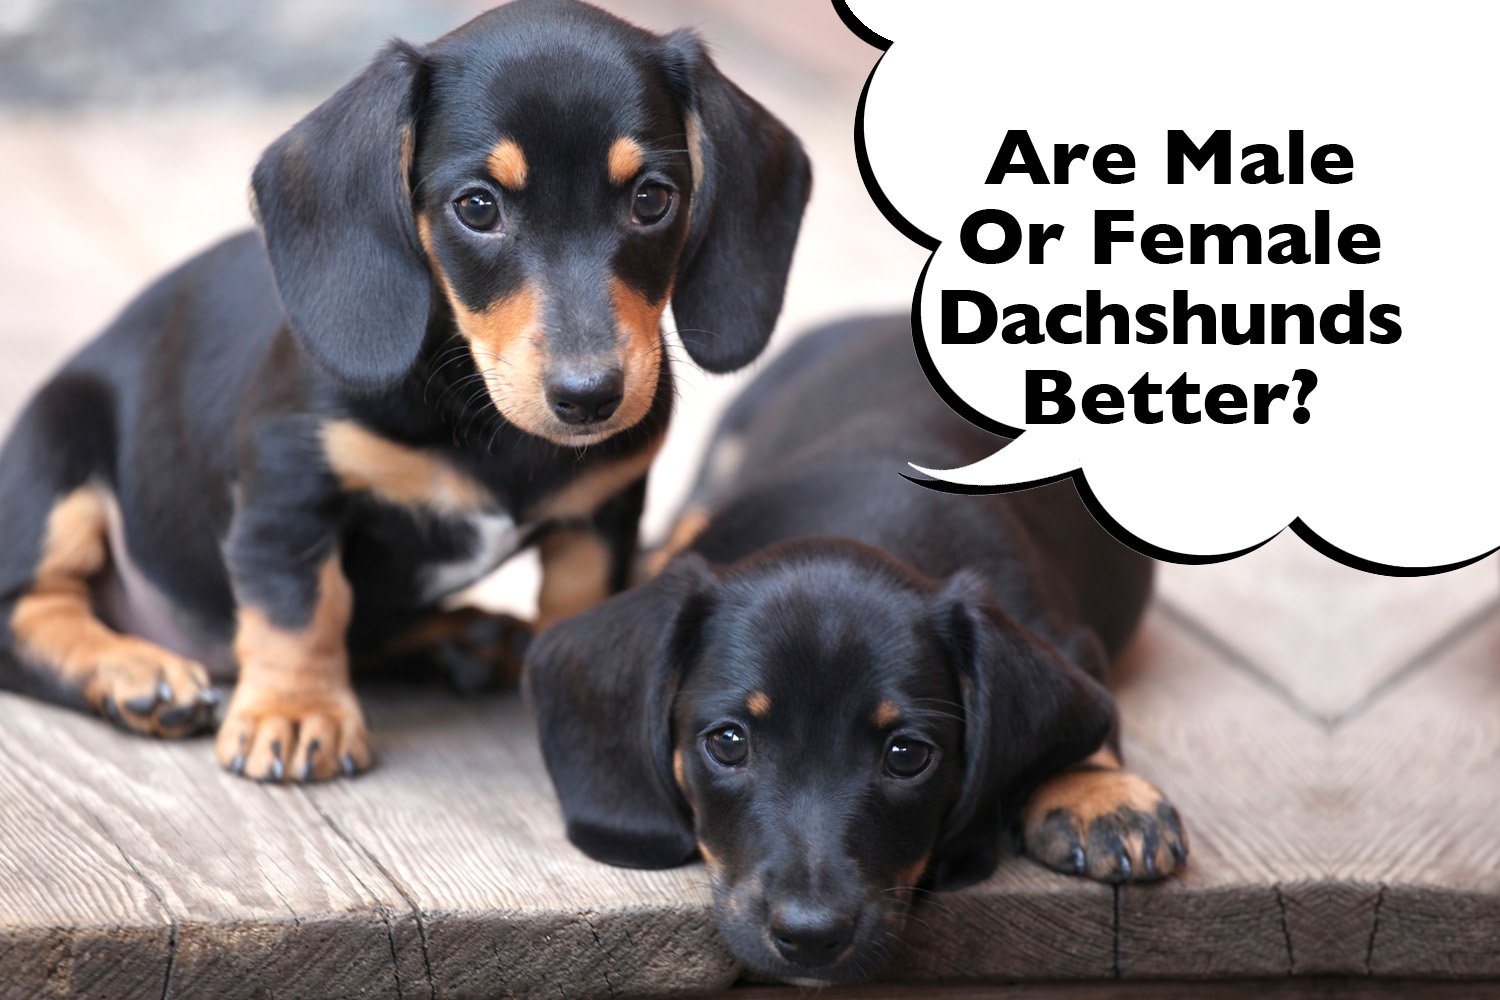 Are Male Or Female Dachshunds Better? - I Love Dachshunds